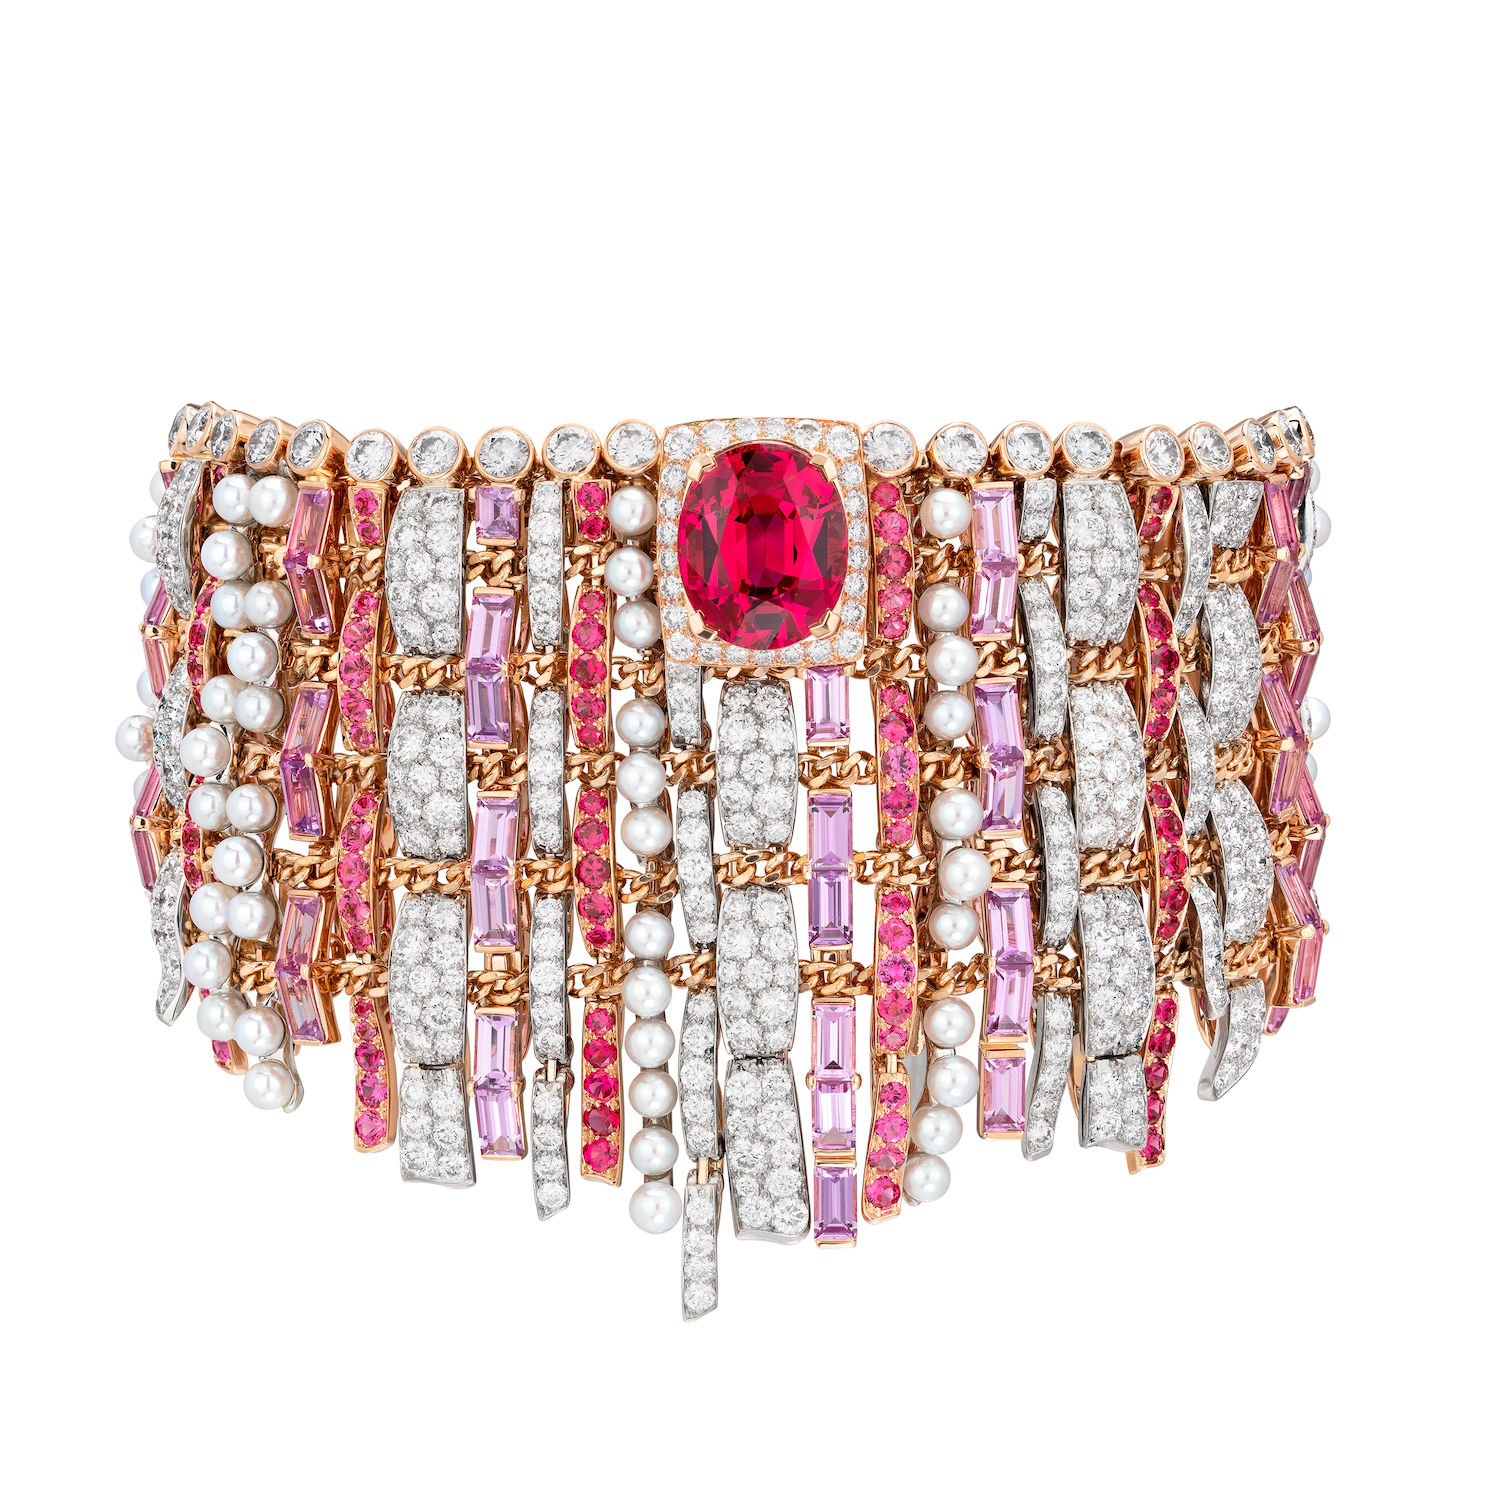 Tweed Couture Bracelet (Photo credit: Chanel)